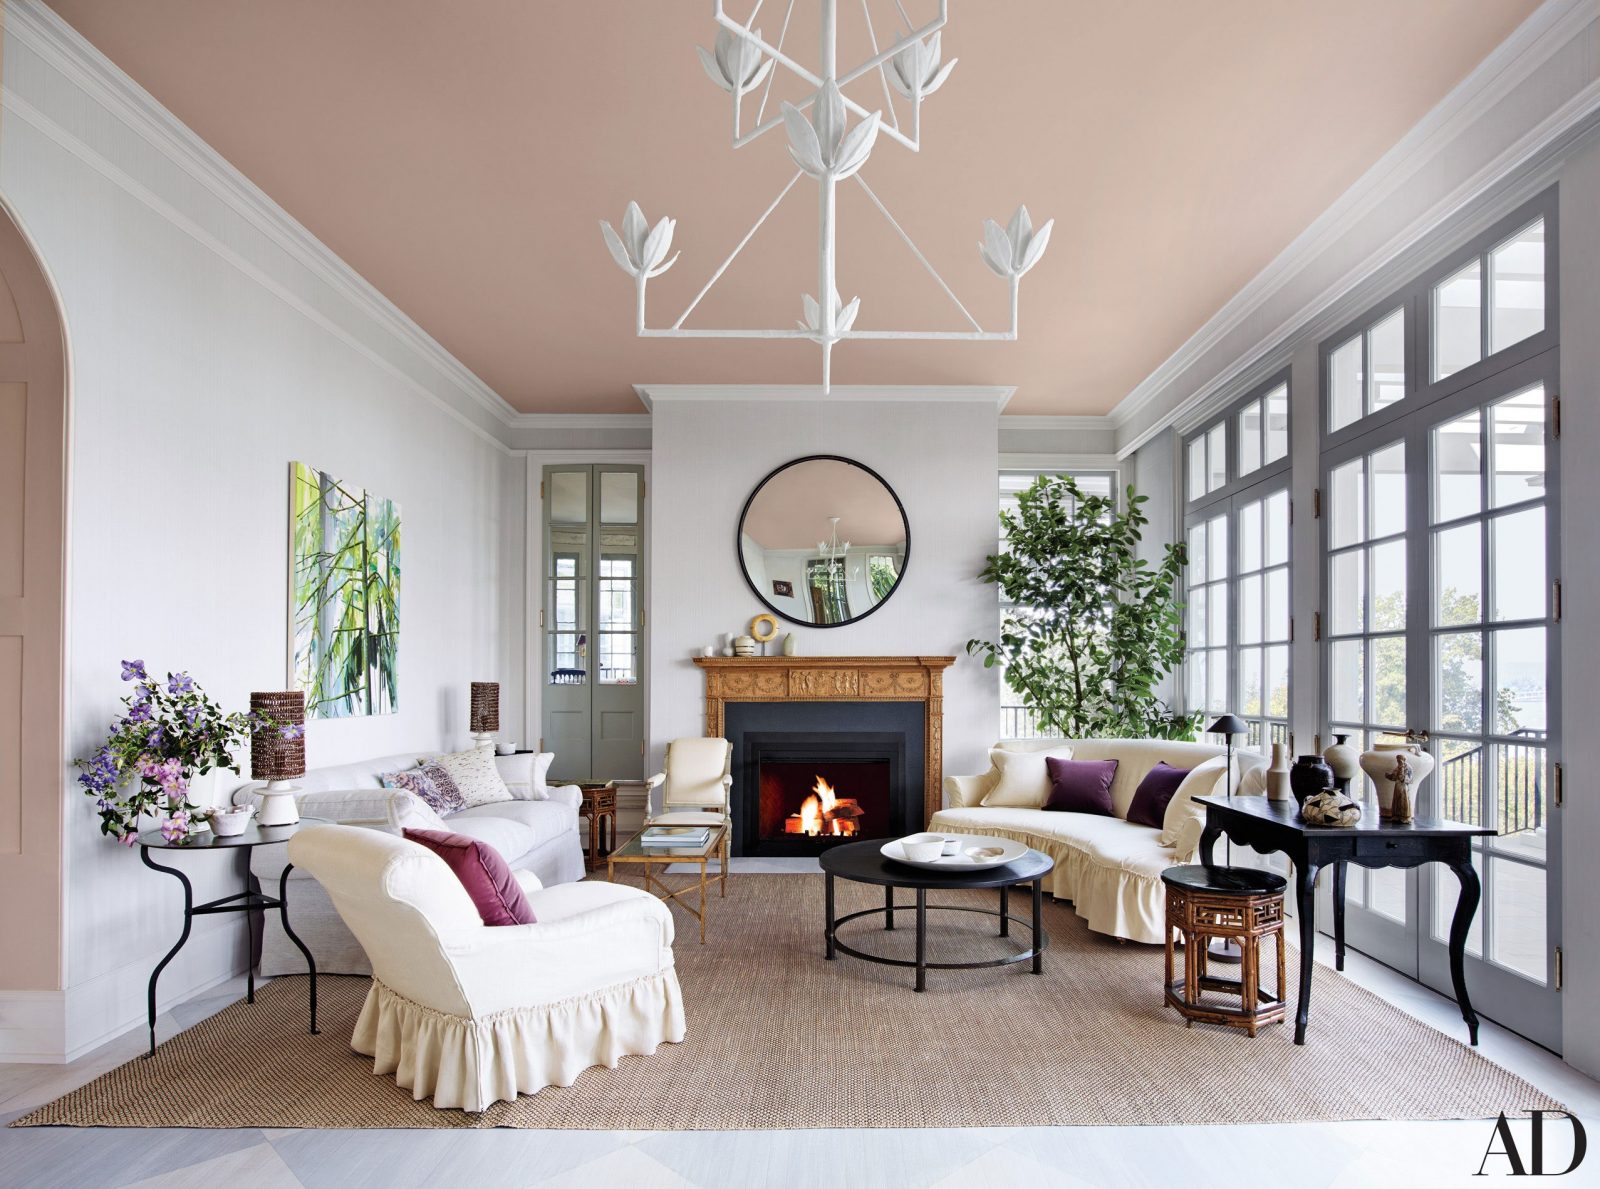 painted living room ceiling ideas photos